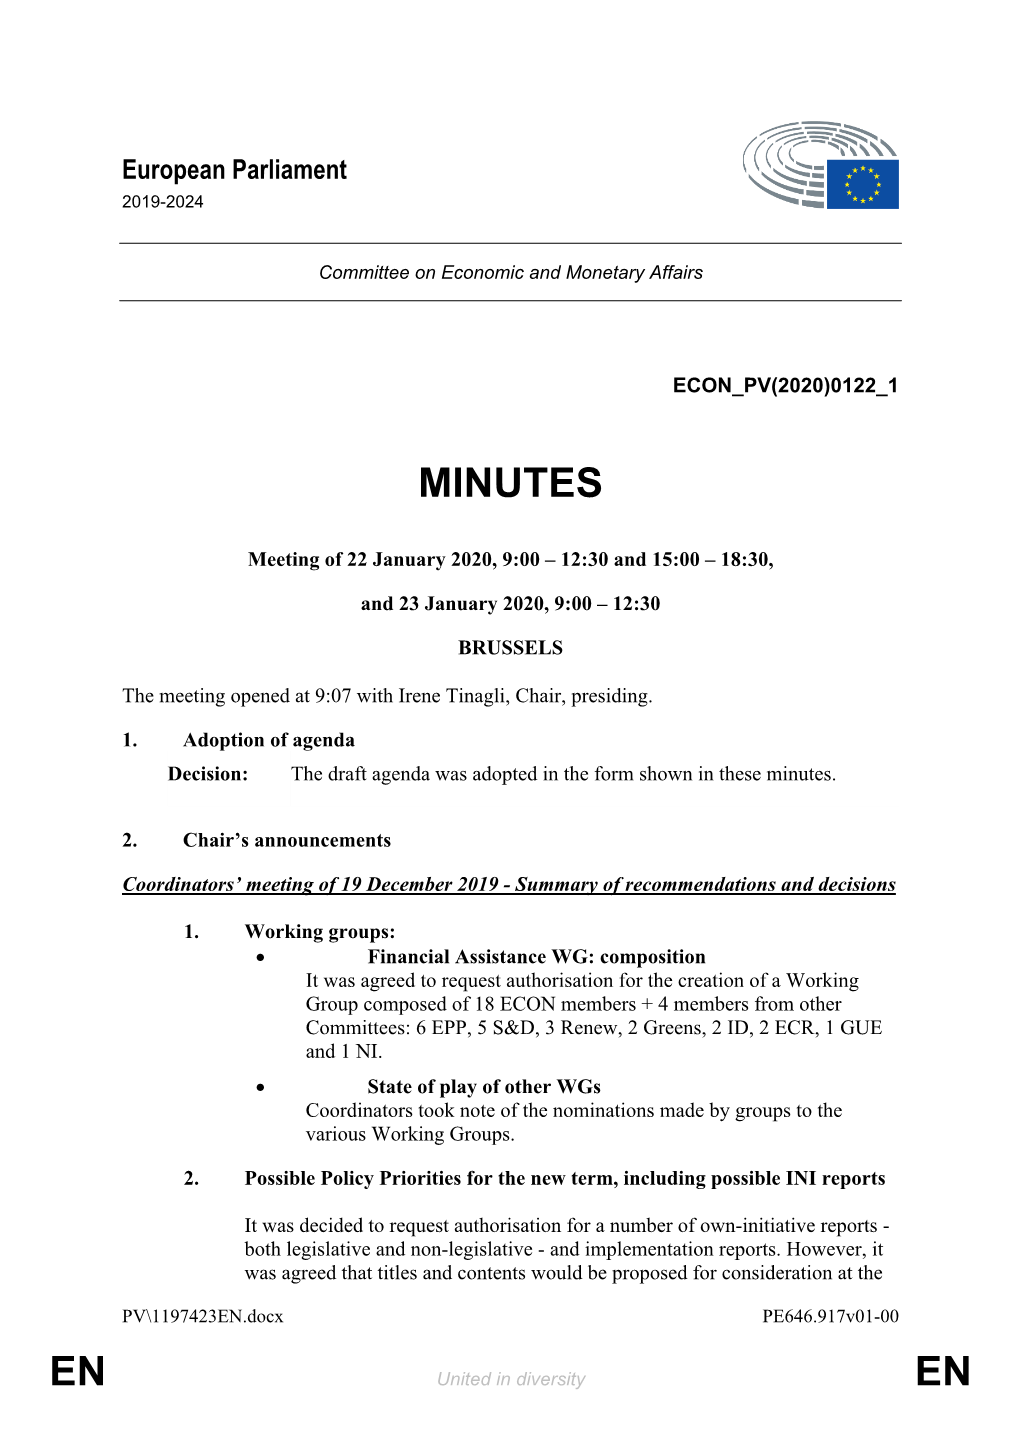 Minutes of the Meeting of 22 January 2020, 9:00